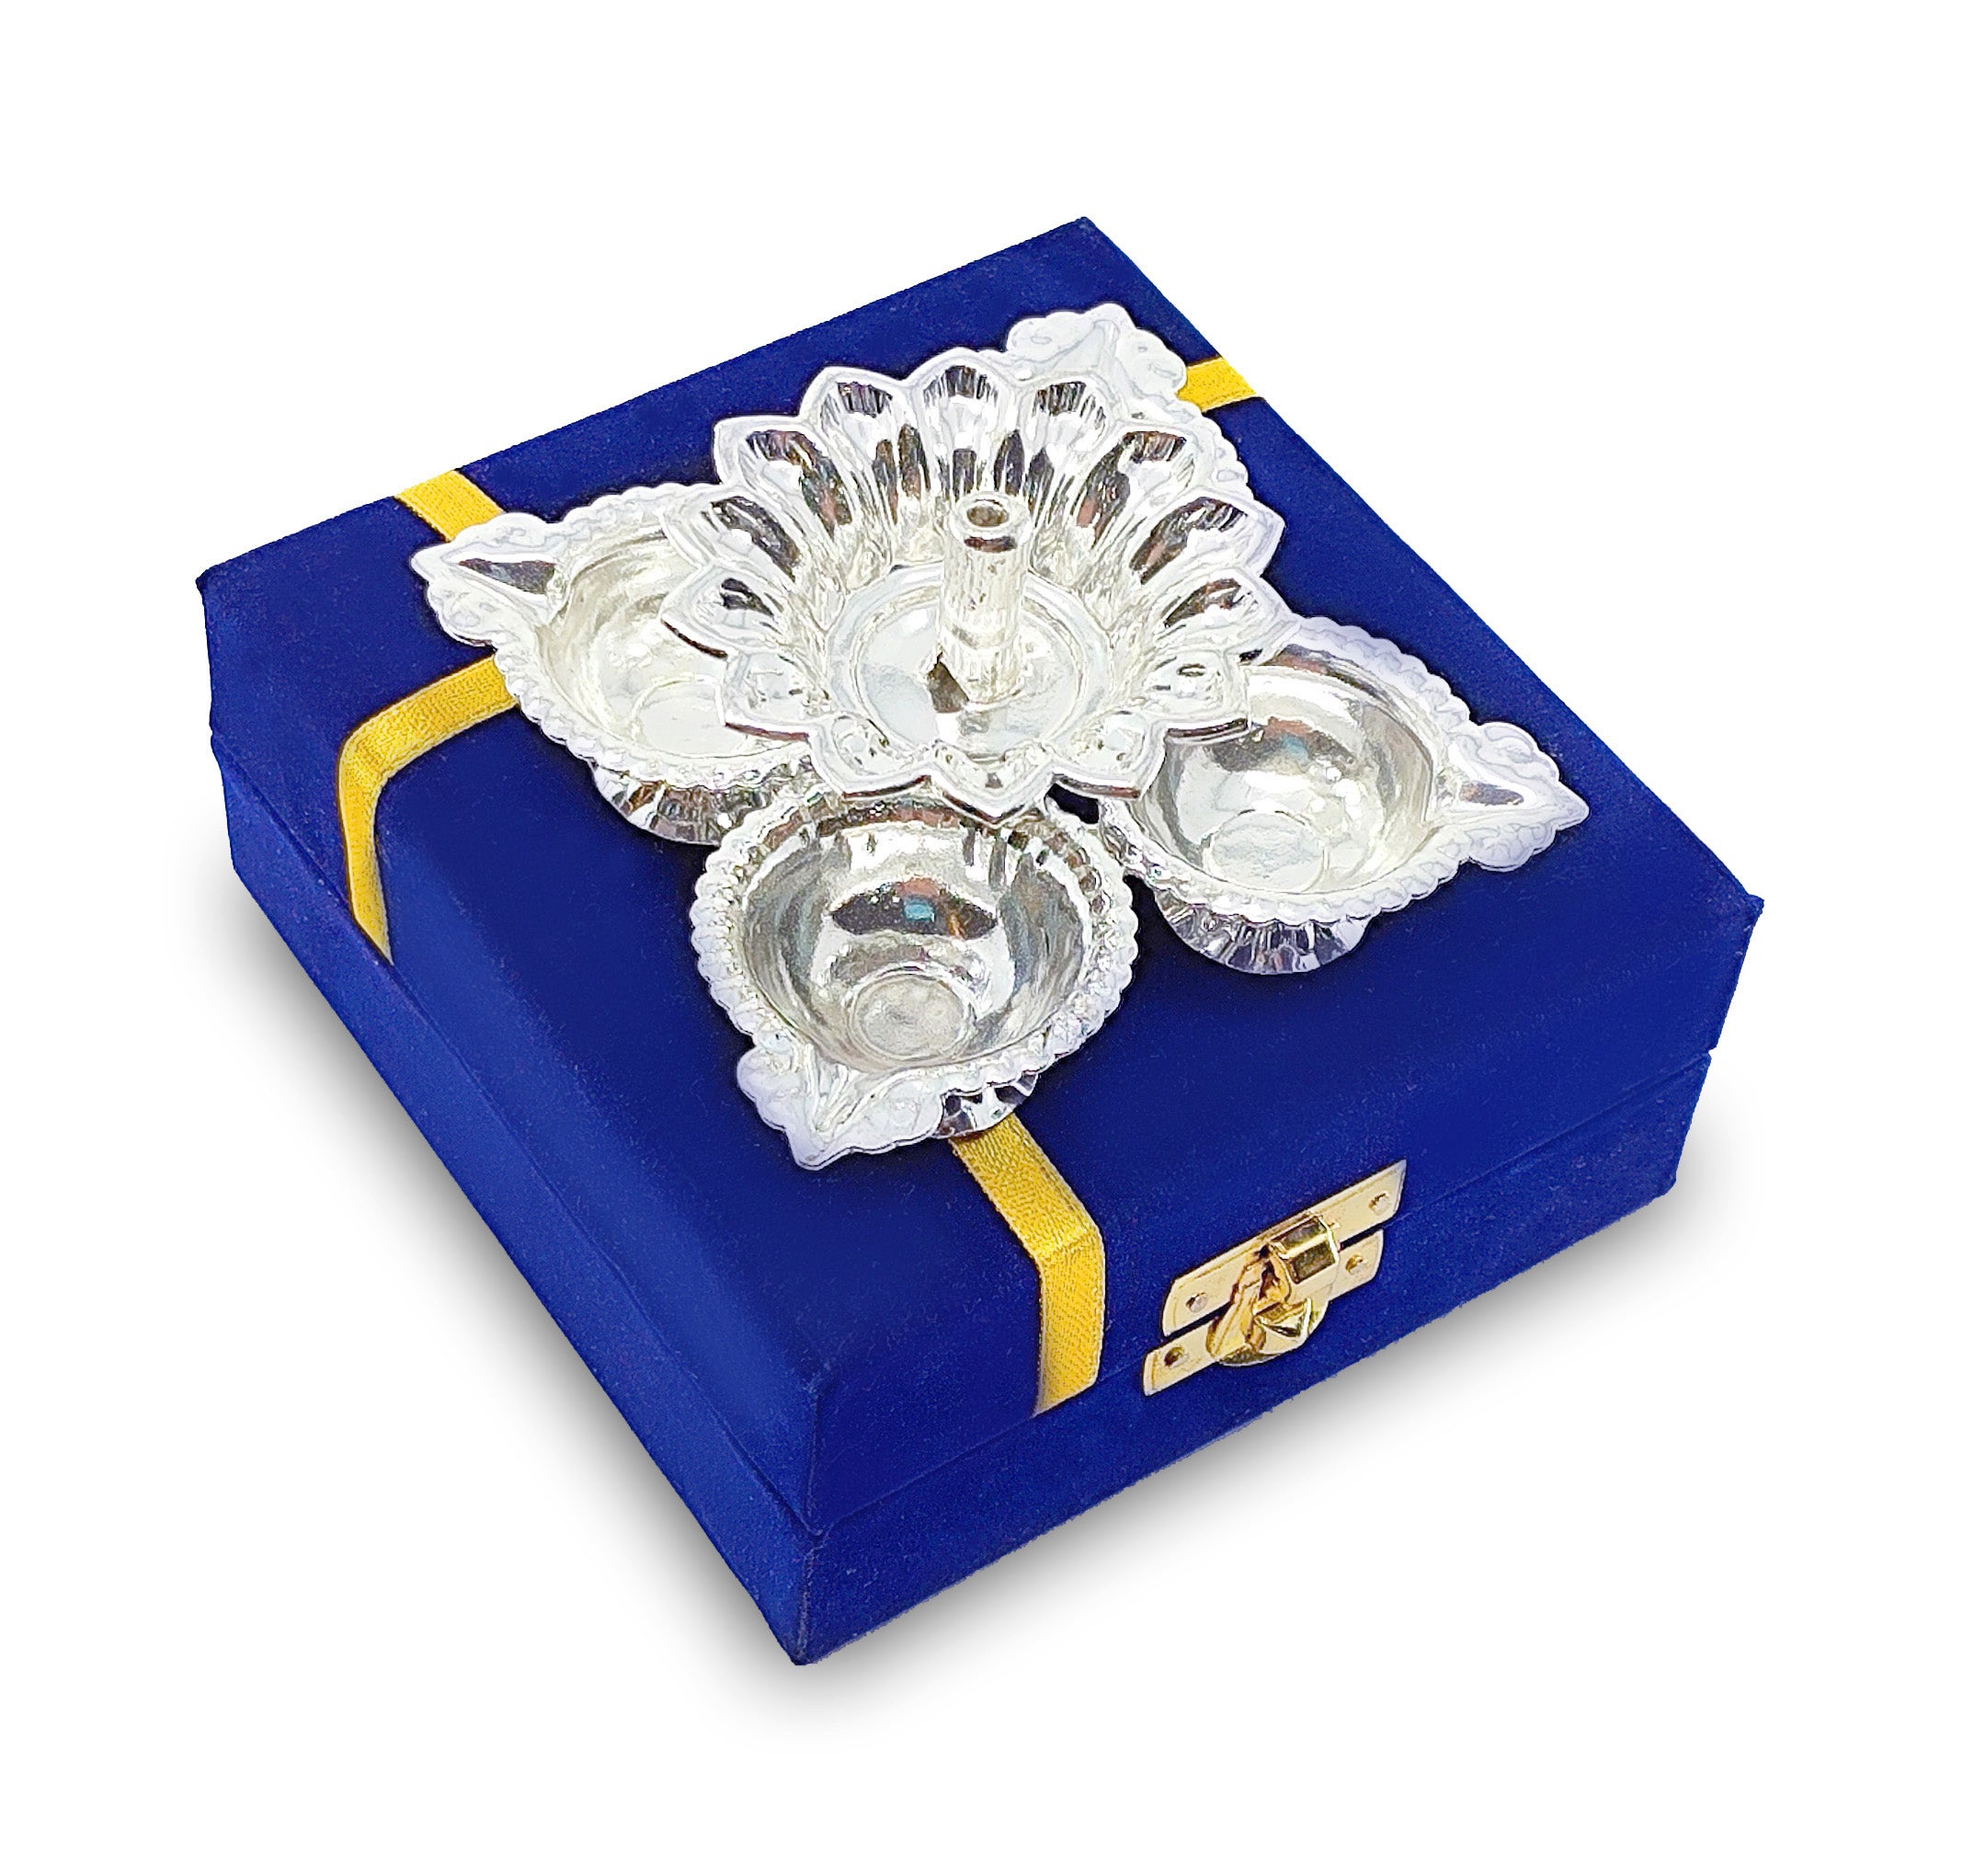 BENGALEN Silver Plated Diya with Blue Velvet Gift Box Panchmukhi Dia Pooja Items Diwali Decoration Puja Gifts Handmade Oil Lamp Traditional Indian Deepawali Gift Items